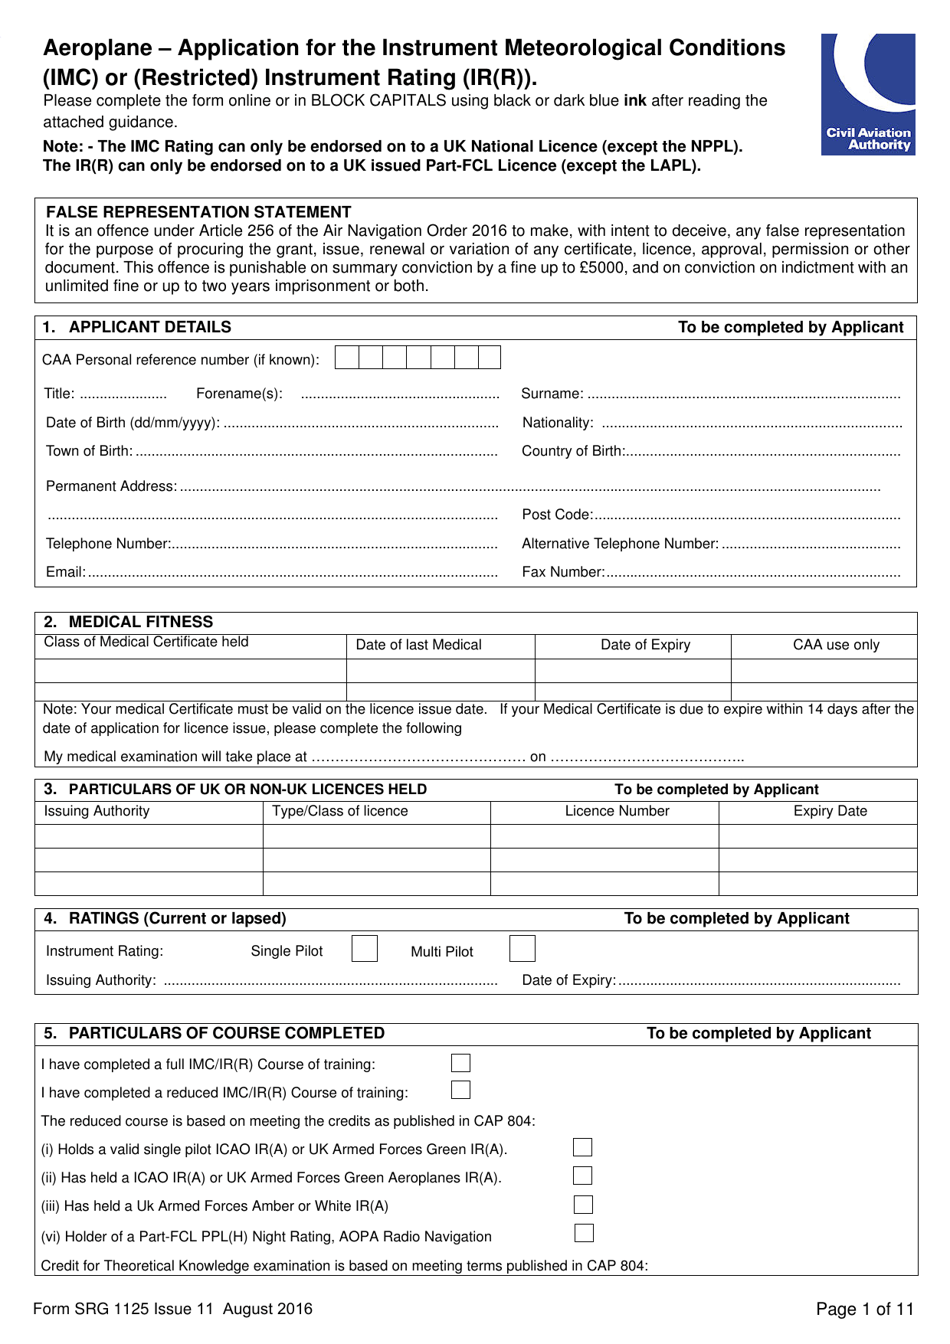 Form SRG1125 Aeroplane - Application for the Instrument Meteorological Conditions (Imc) or (Restricted) Instrument Rating (Ir(R)) - United Kingdom, Page 1